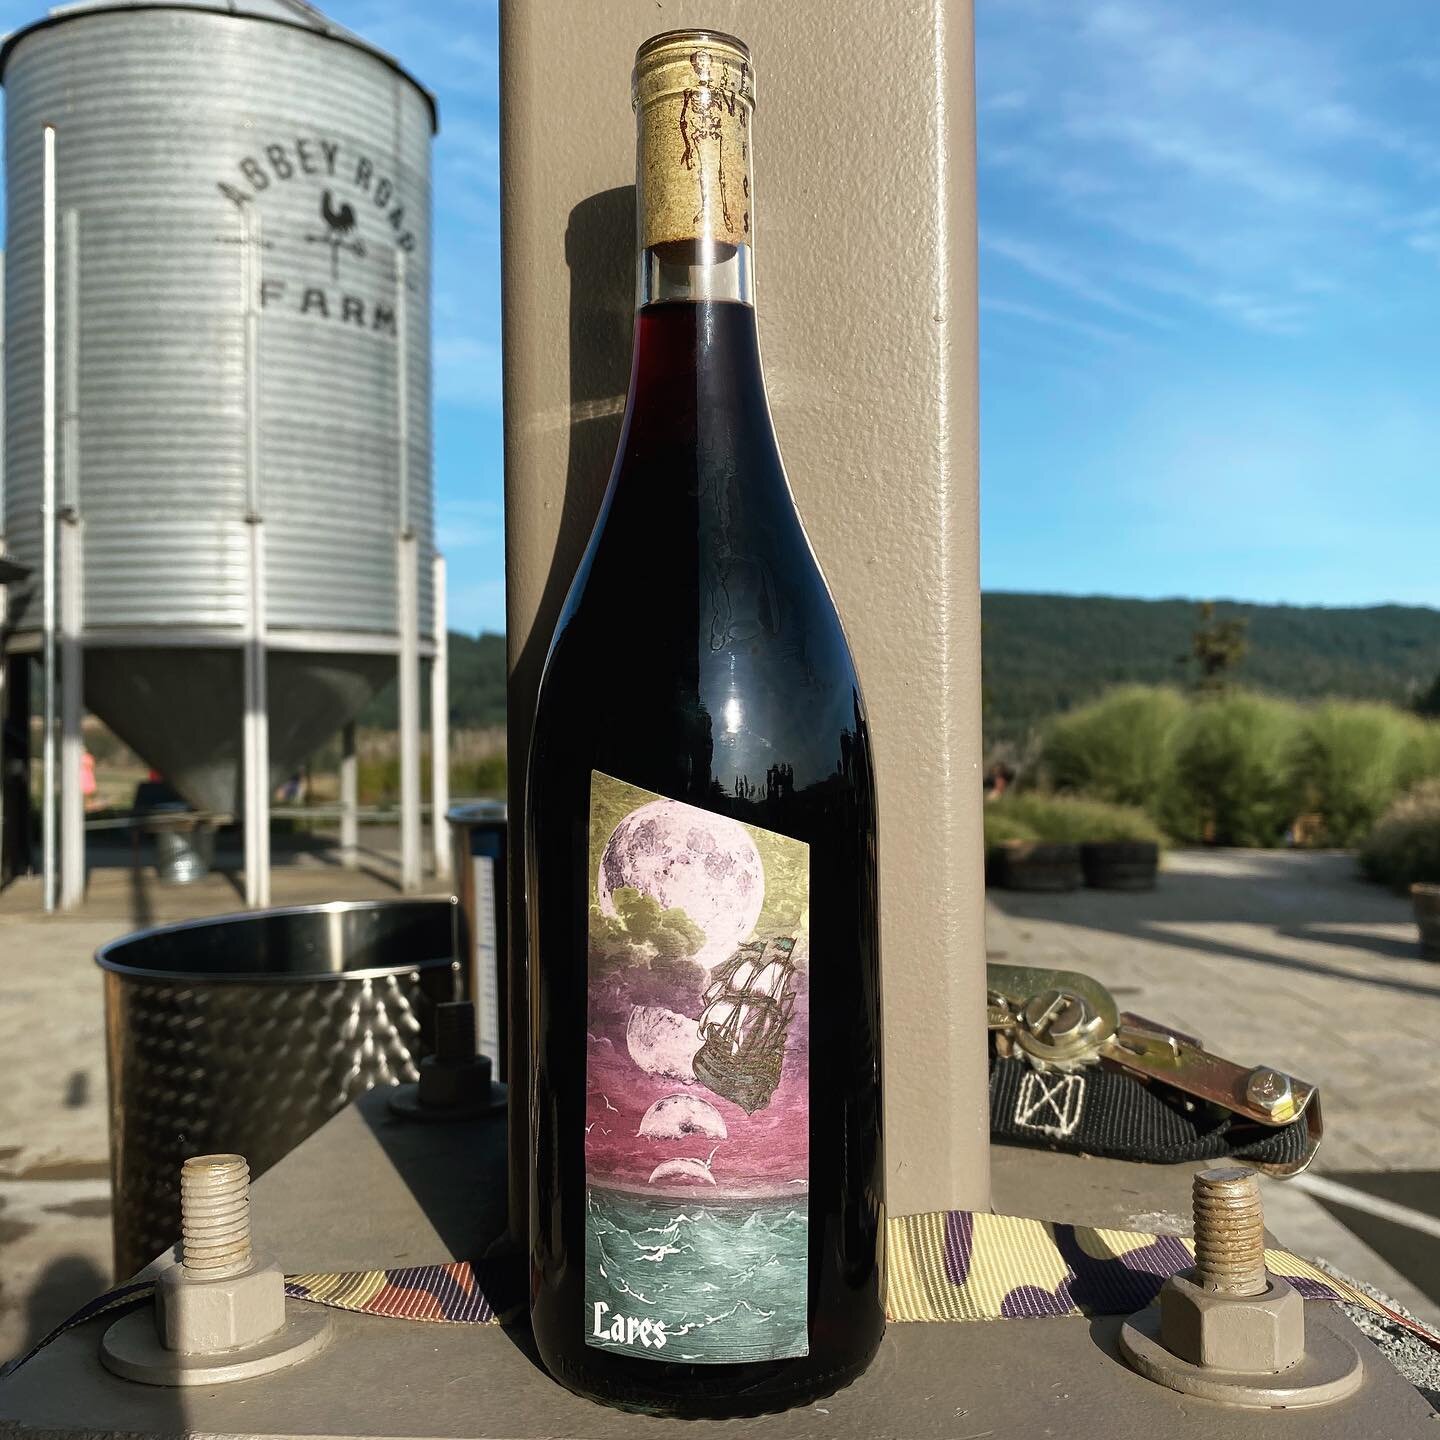 Only 85 cases were made of my 2019 &ldquo;Voyage to the Moon&rdquo; Tempranillo. 1984 planted Vidon Vineyard in Willamette Valley&rsquo;s Chehalem Mountains. 60 cases pre-sold. Get it while the gettin&rsquo;s good. #willamettevalley #tempranillo #nat